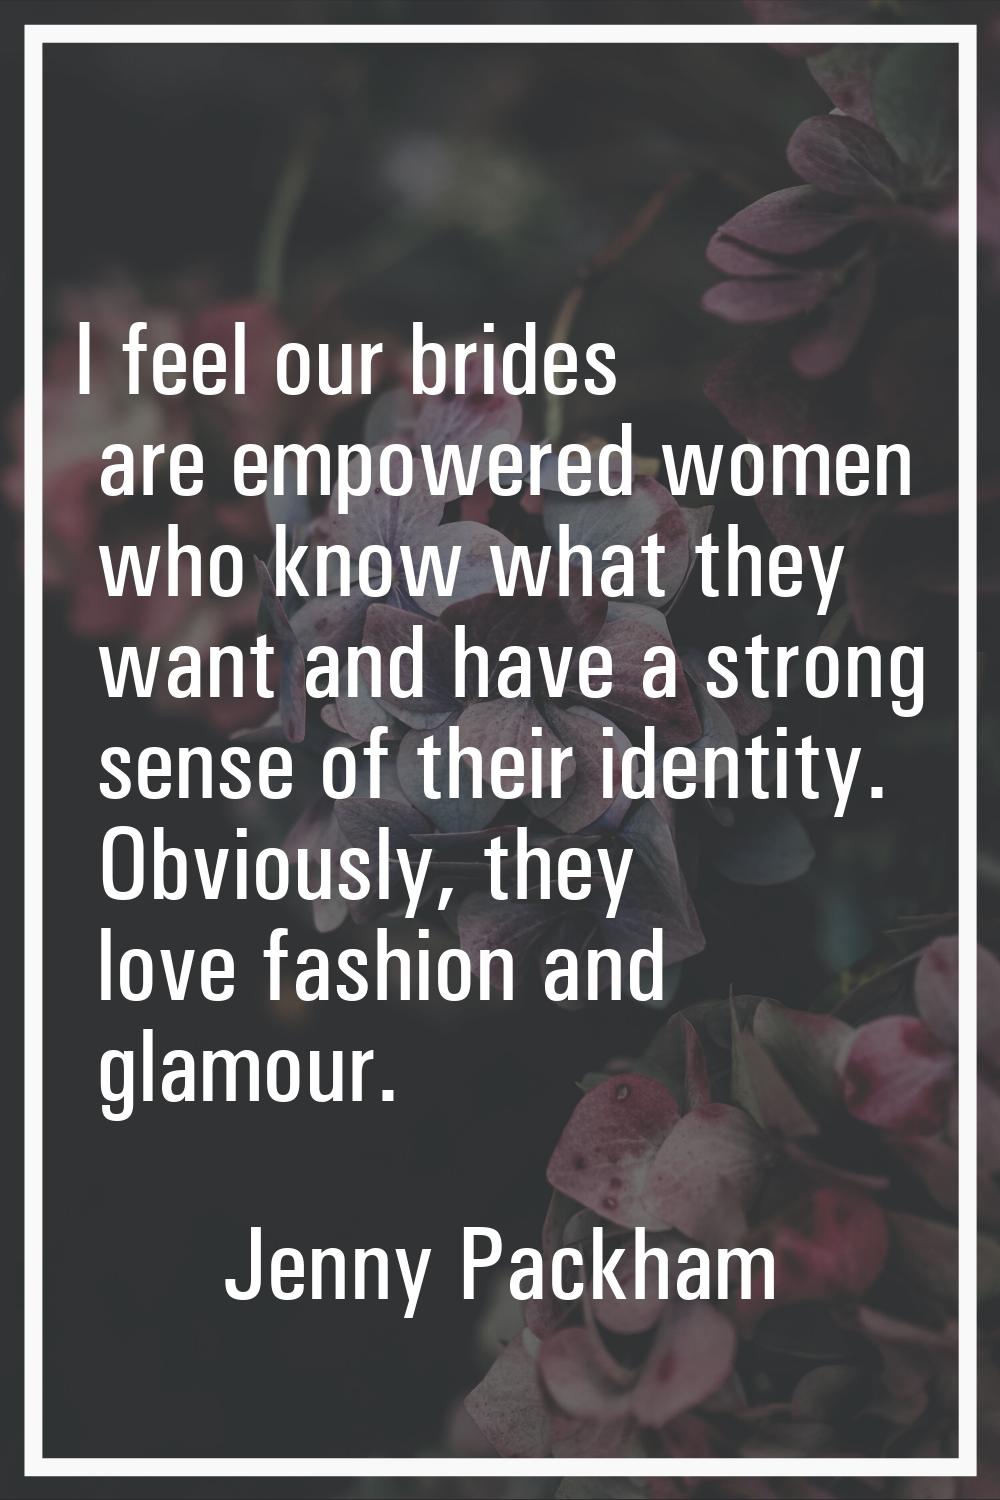 I feel our brides are empowered women who know what they want and have a strong sense of their iden